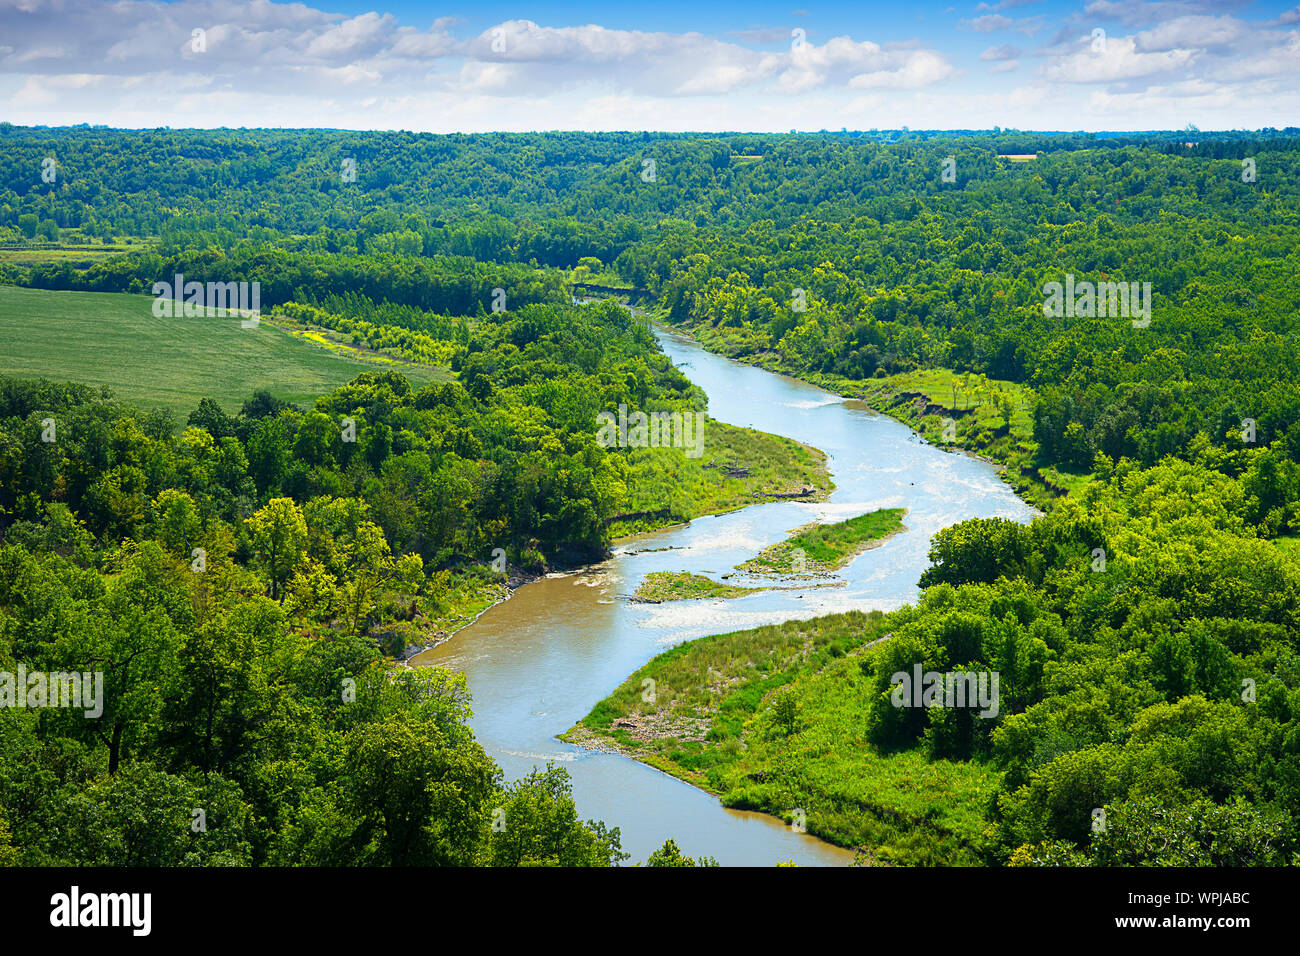 Beautiful river winding in an S-curve through lush forest covered landscape.  Location: Pembina Gorge just west of Walhalla, North Dakota, USA Stock Photo